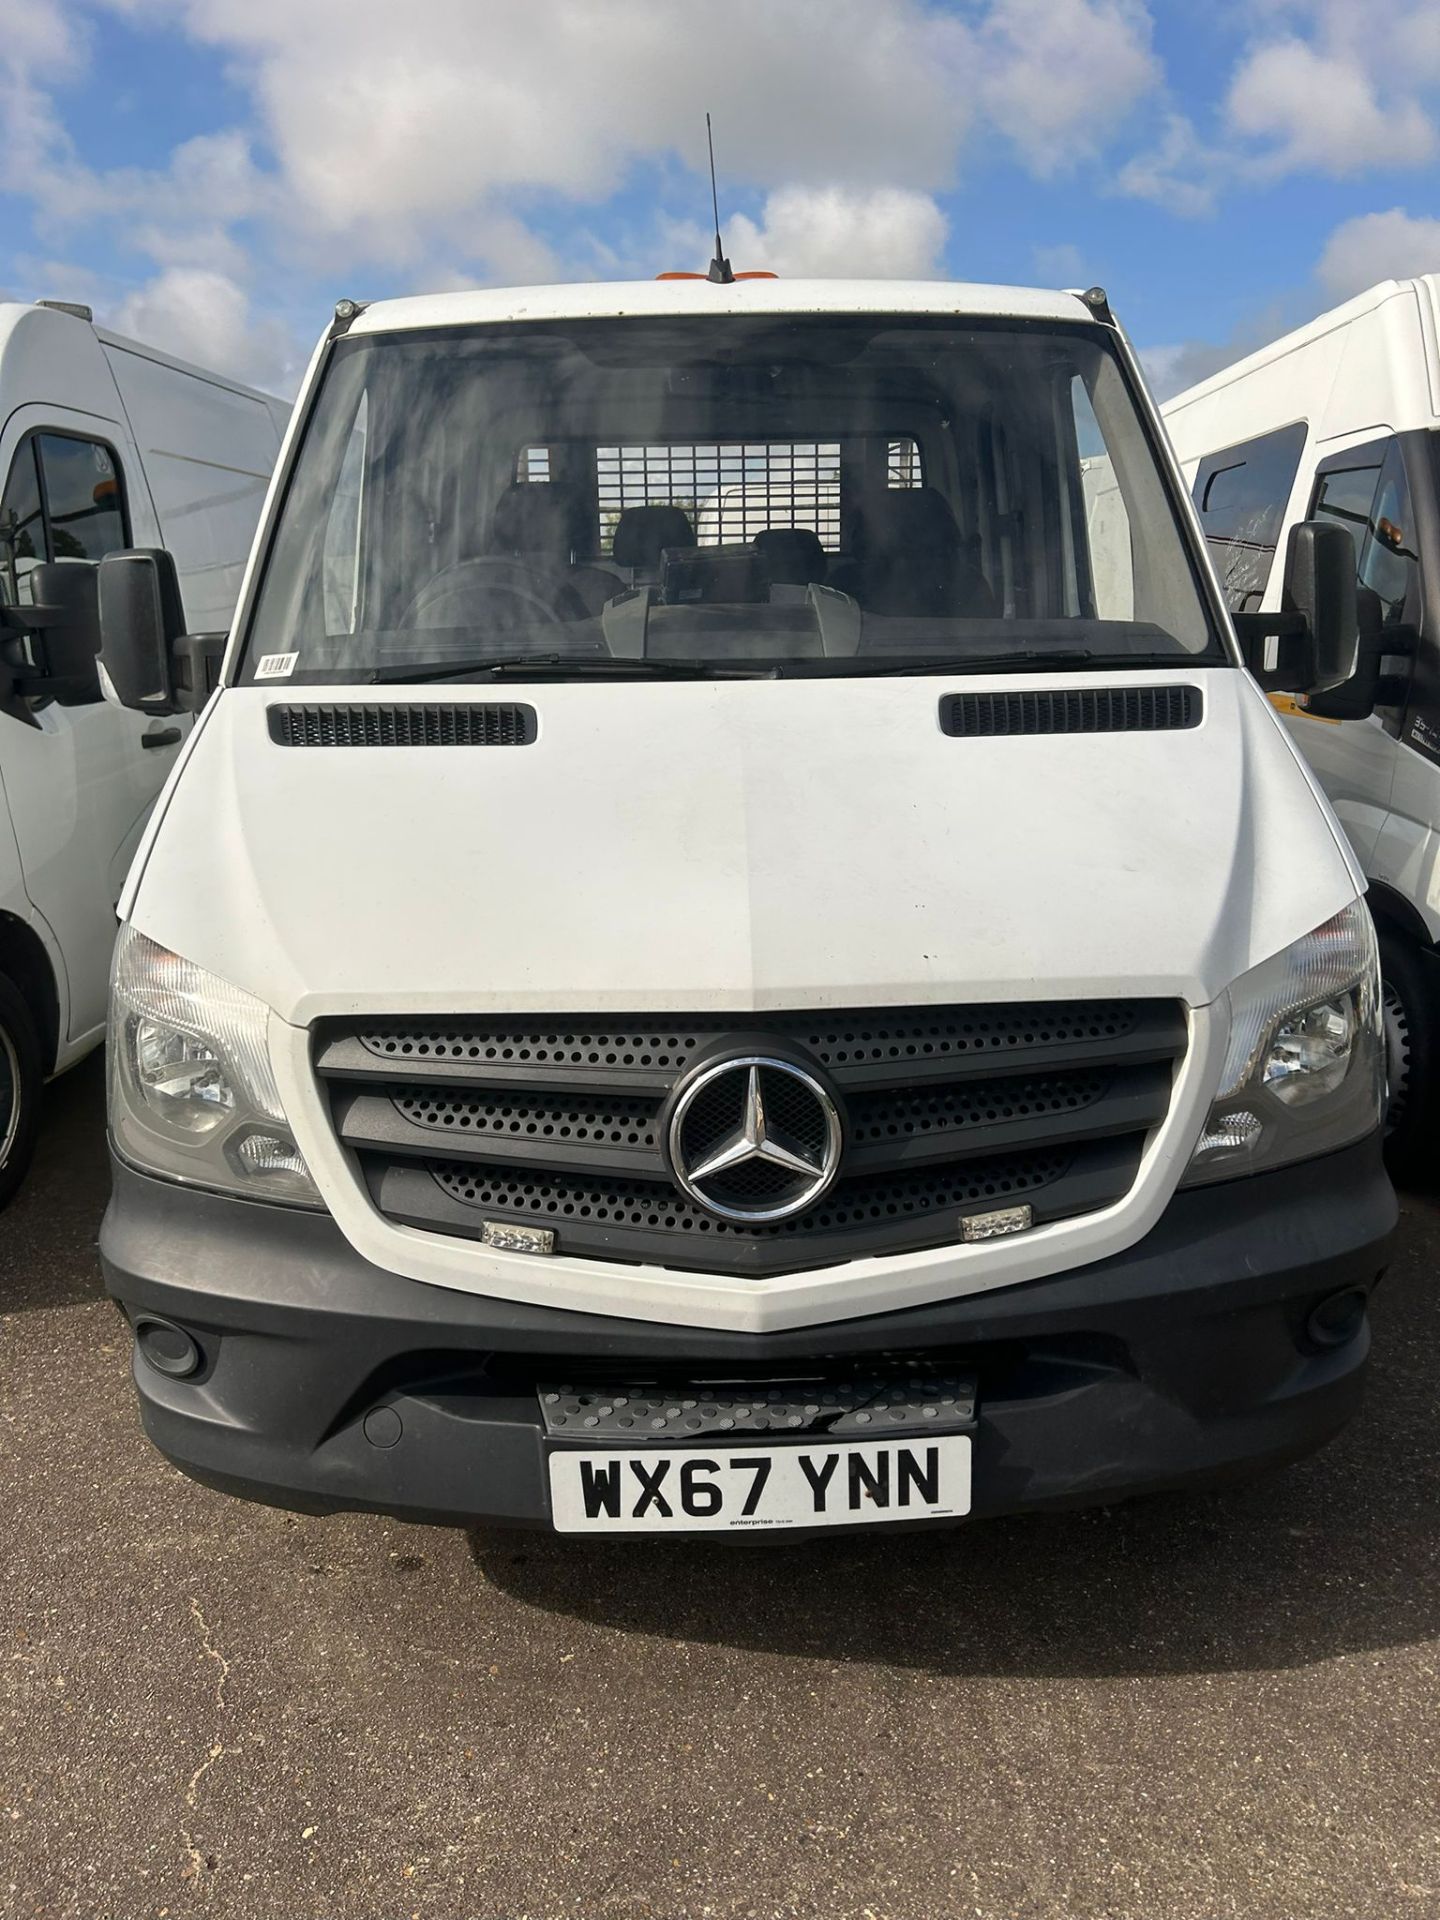 MERCEDES SPRINTER DOUBLE CAB PICKUP TRUC - Image 2 of 2